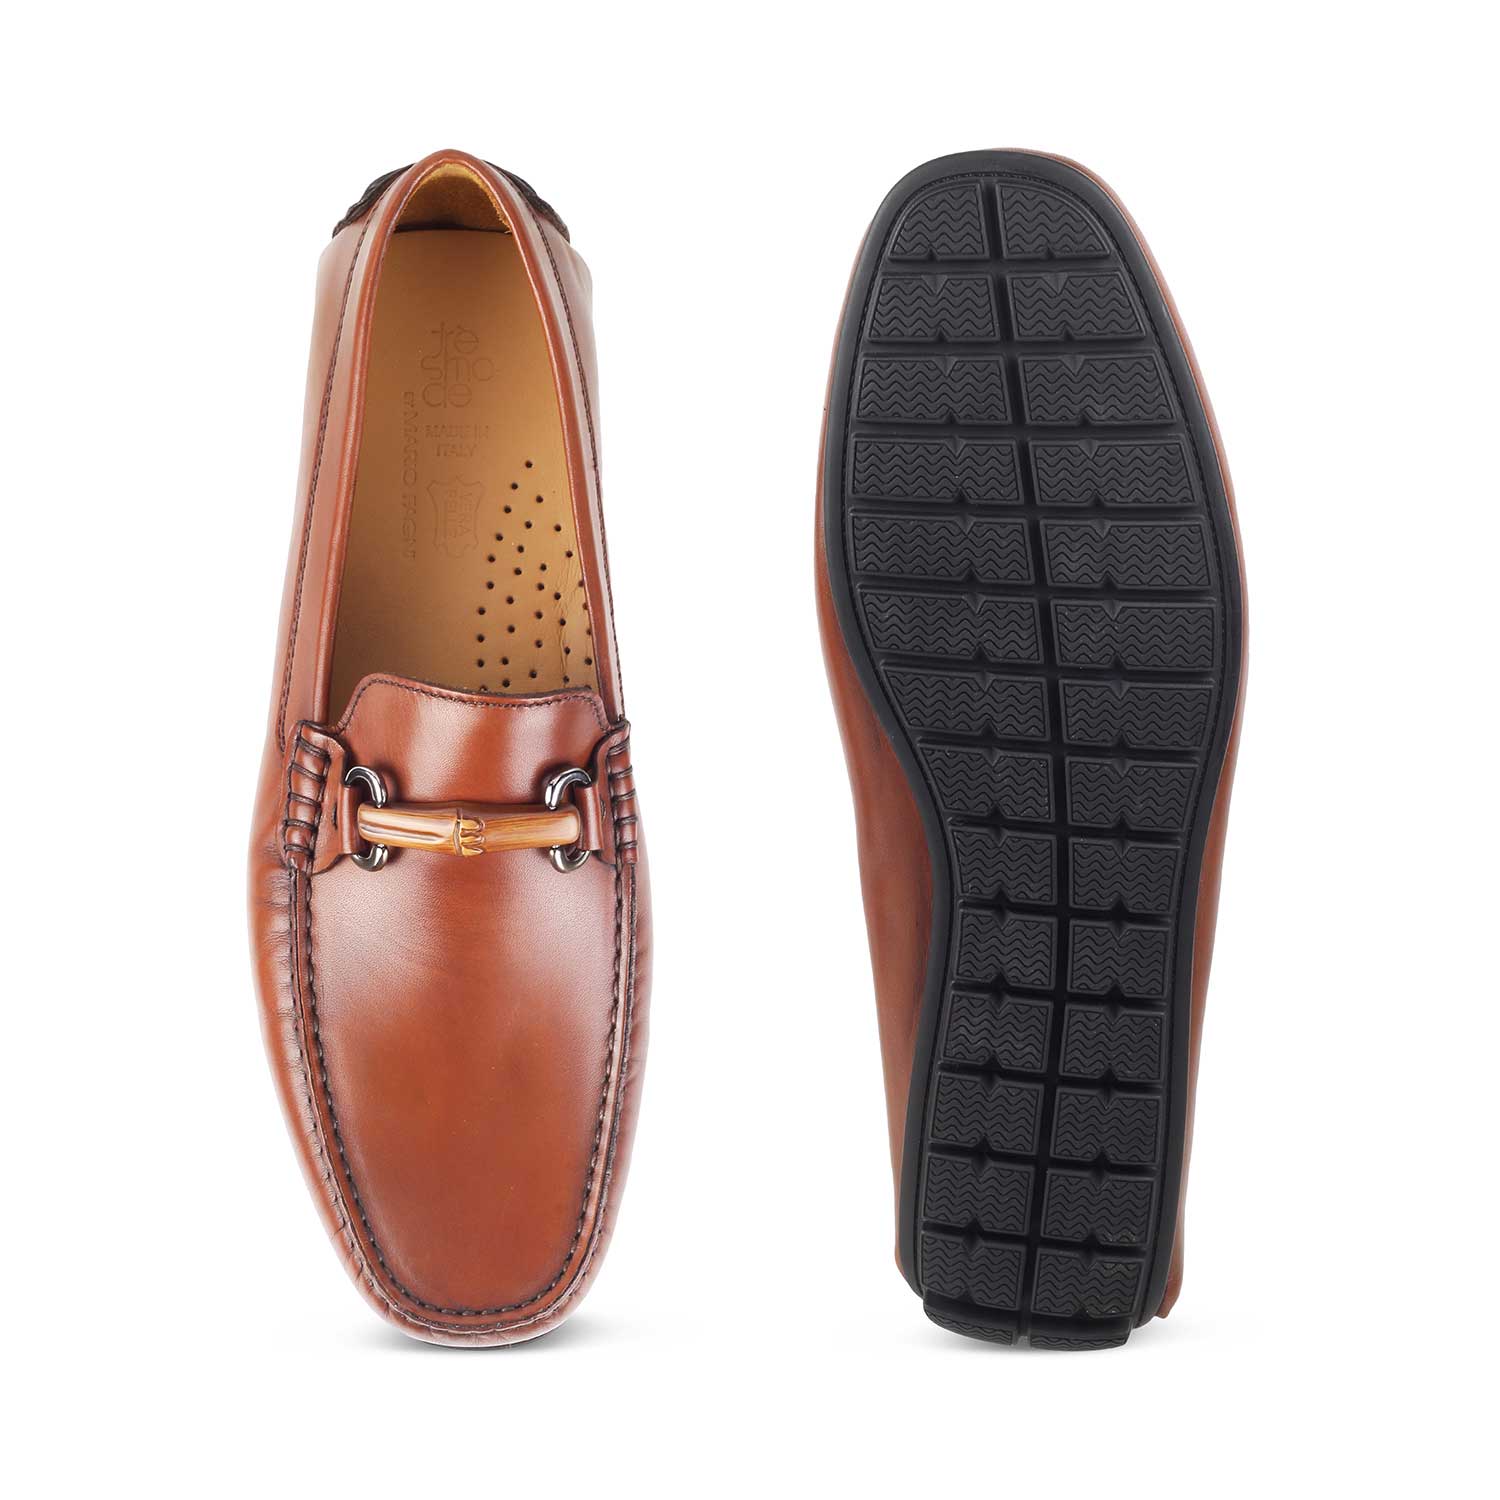 Tresmode-The Prodo Brown Men's Handcrafted Leather Driving Loafers Tresmode-Tresmode